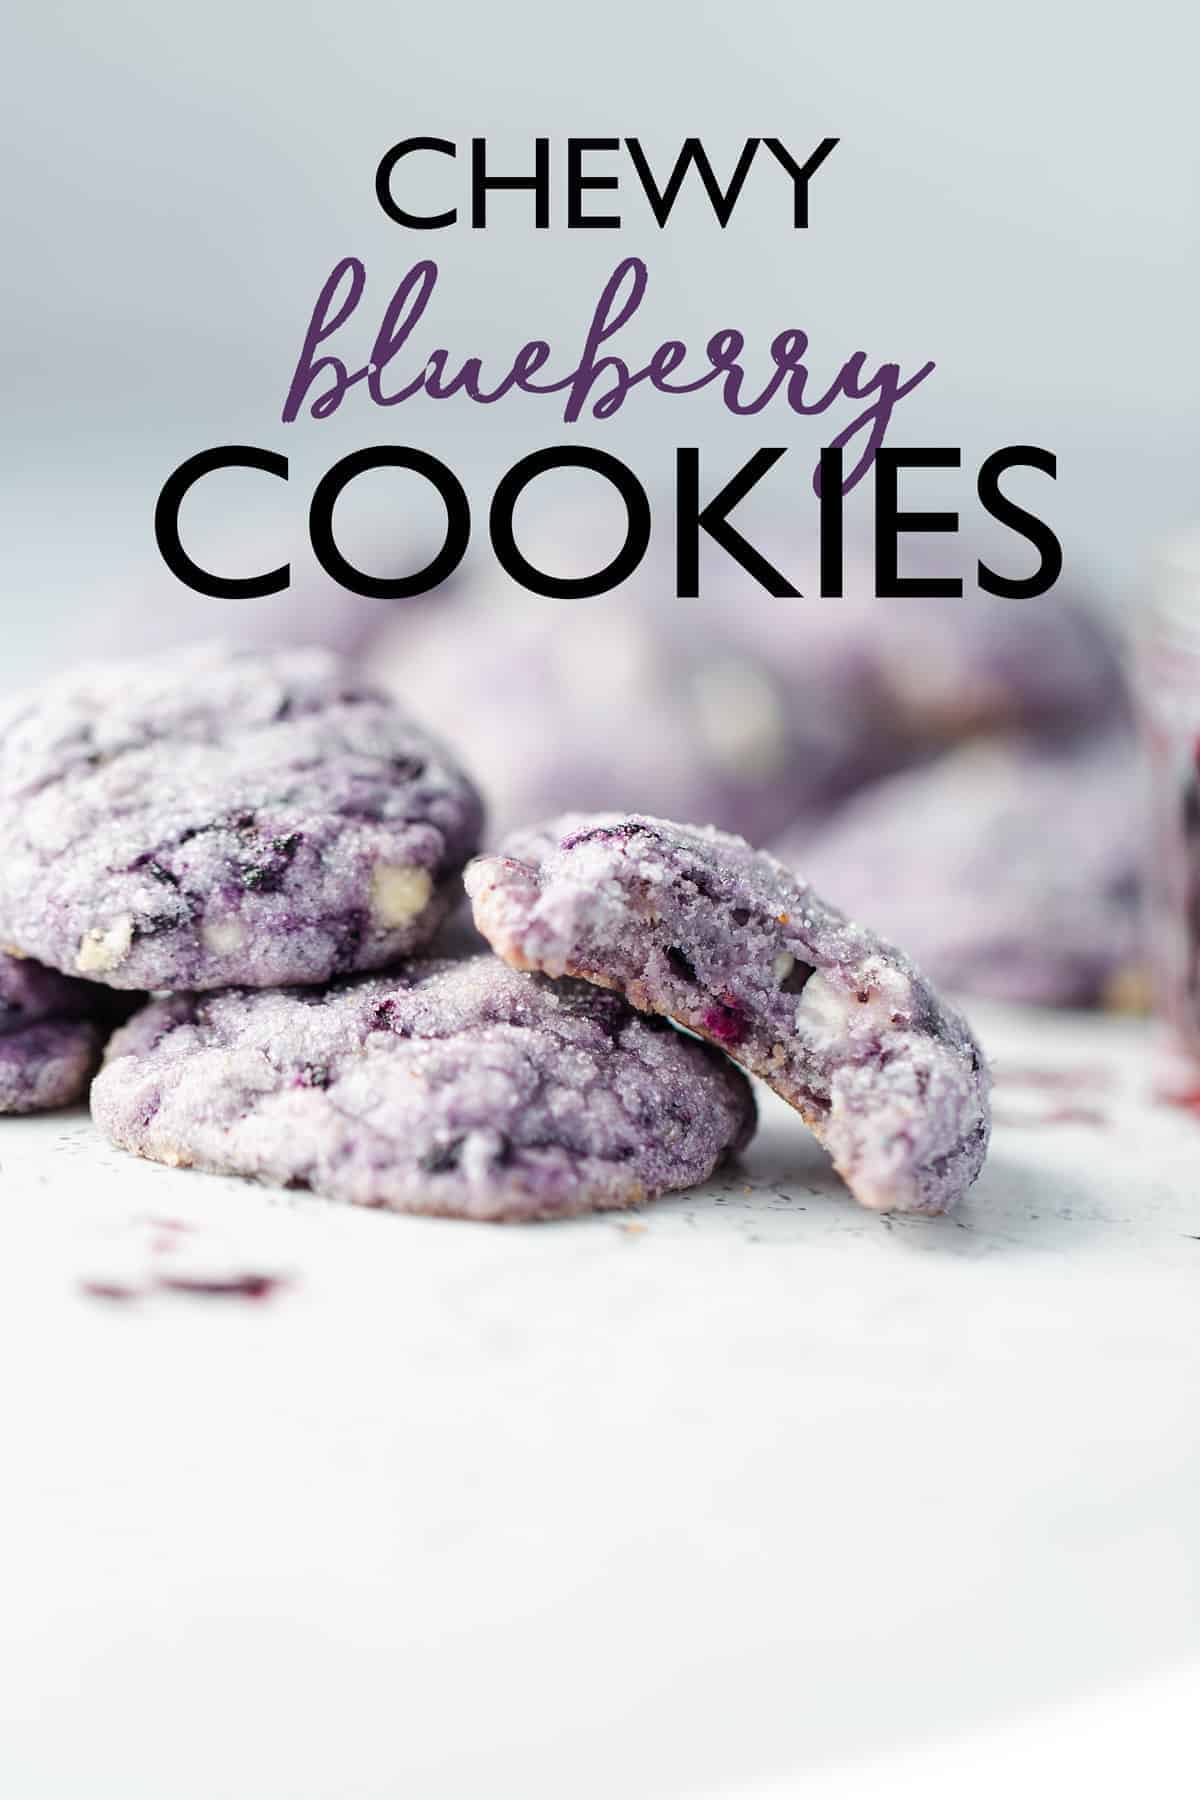 Vibrant Chewy Blueberry Cookies are a naturally colored purple cookie bursting with fresh blueberry flavor from fresh or frozen berries!  blueberry cookies | blueberry recipes | blueberry desserts | purple foods 